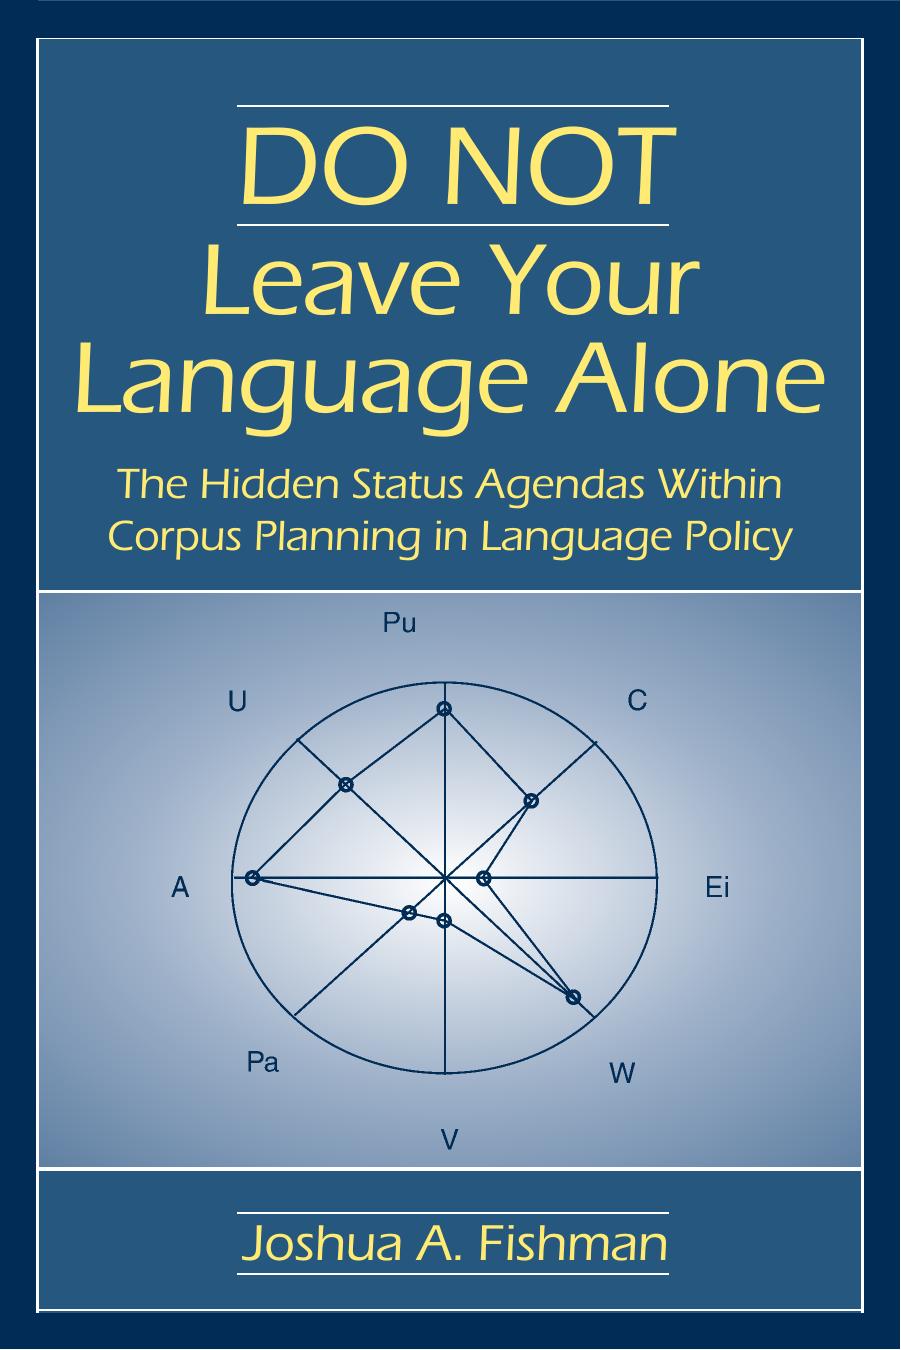 Do Not Leave Your Language Alone: The Hidden Status Agendas within Corpus Planning in Language Policy